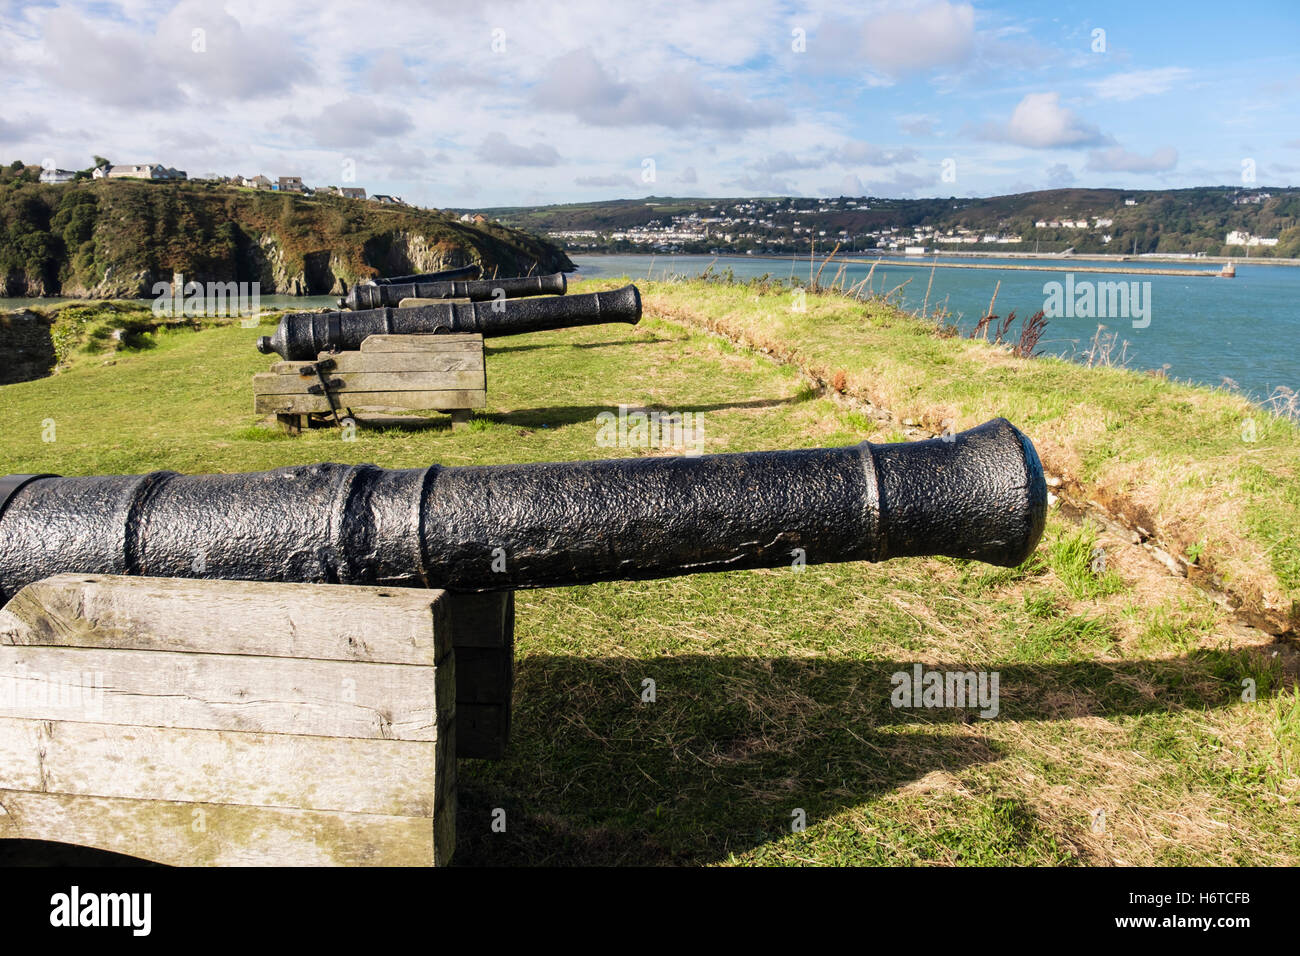 Old 9 pounder guns in 18th century fort ruins 1781 on a headland overlooking port. Fishguard, Pembrokeshire, Wales, UK Stock Photo